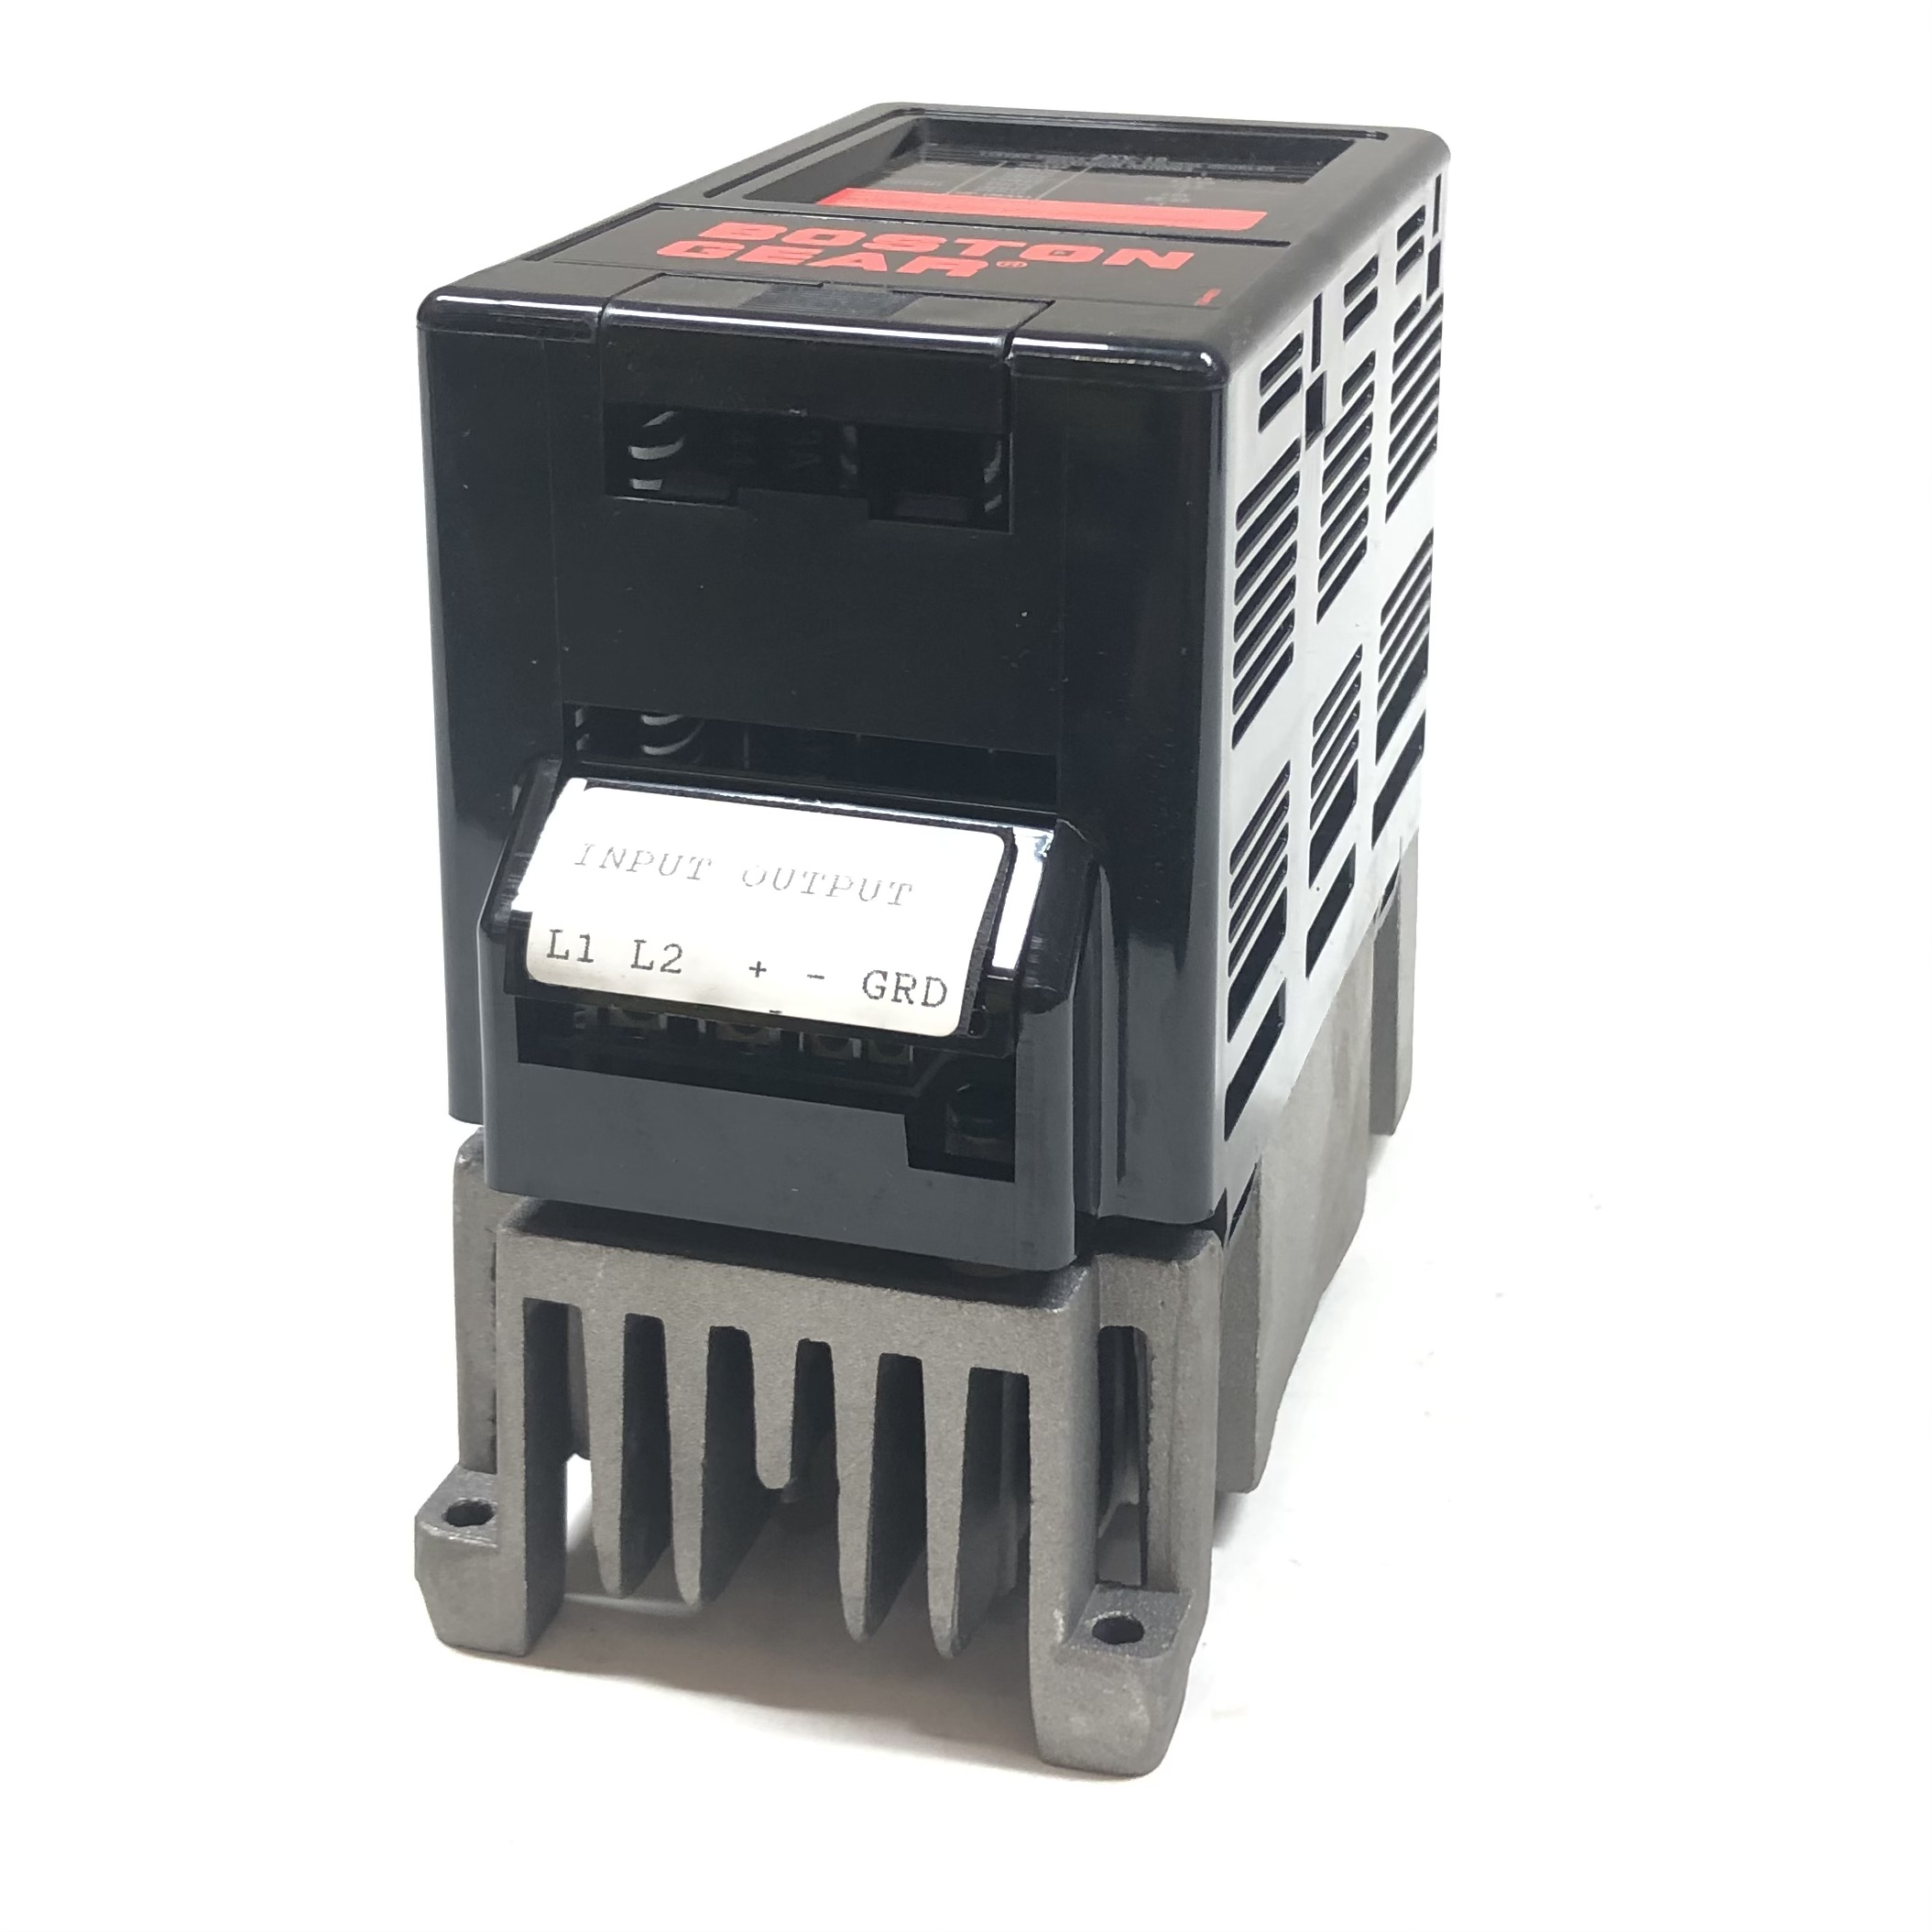 2XV-10 Boston Gear  1 HP Variable Frequency Drive, 115 Volt, 1 Phase Input 5